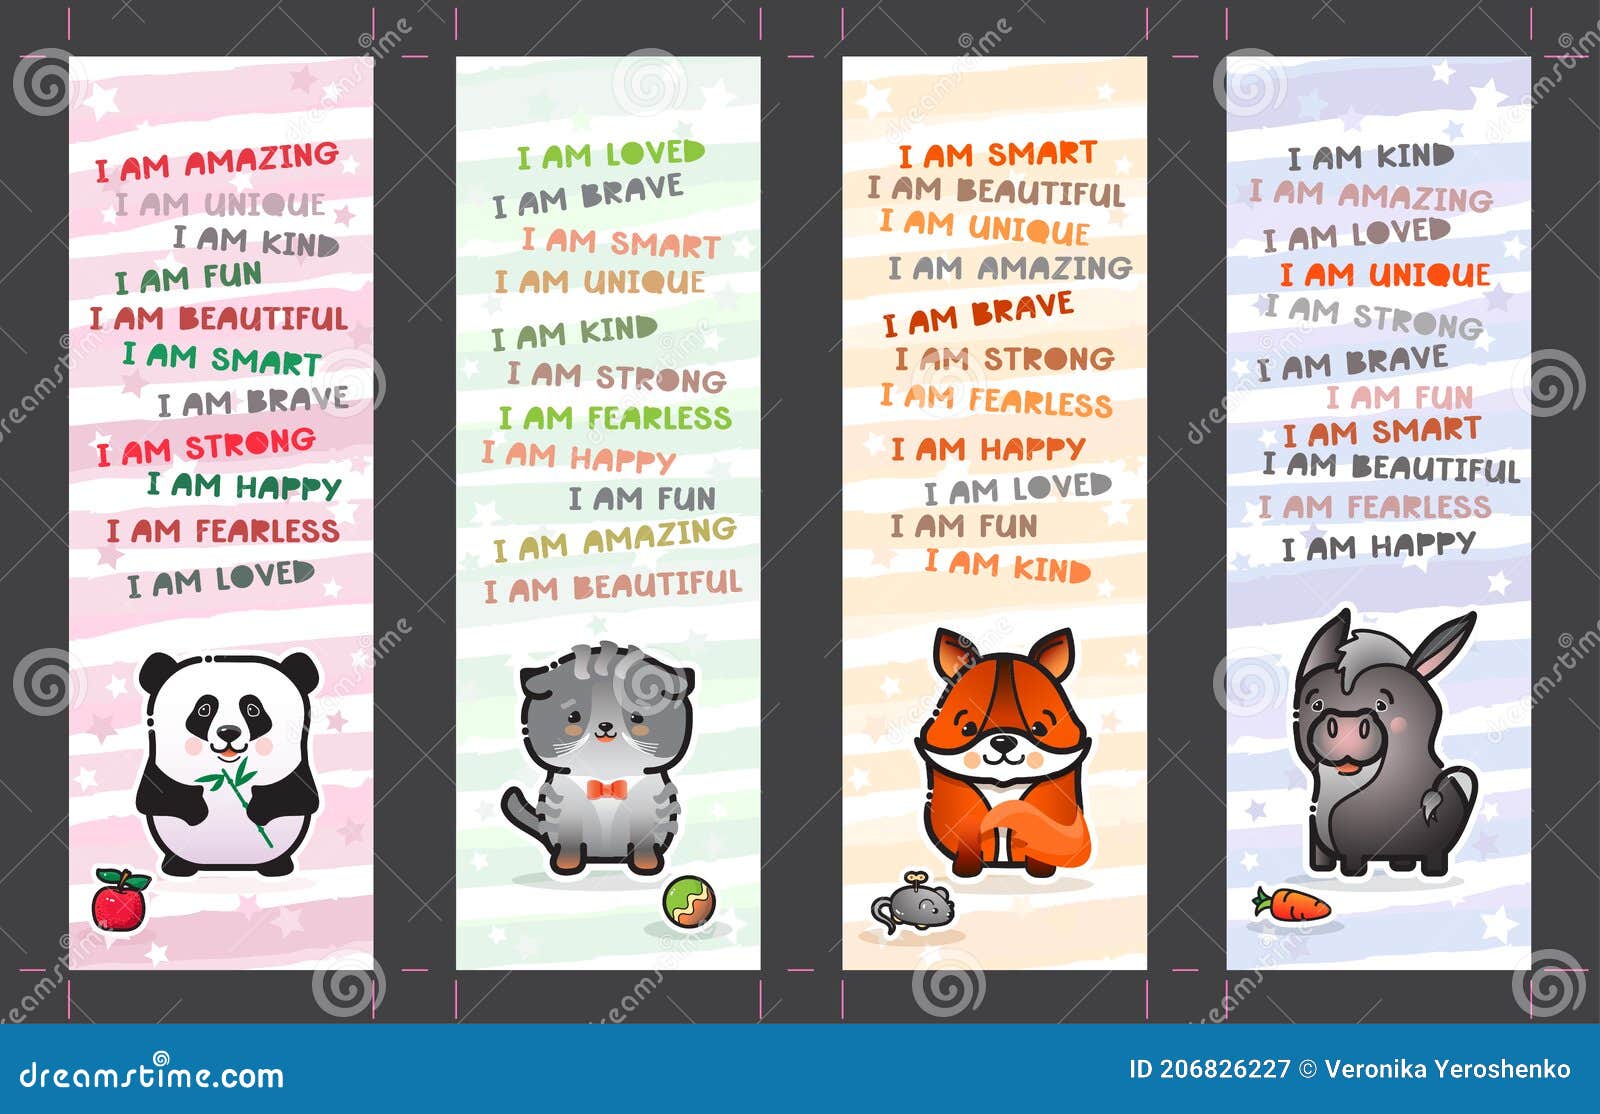 bookmark set with cute animal and affirmations for kids. .